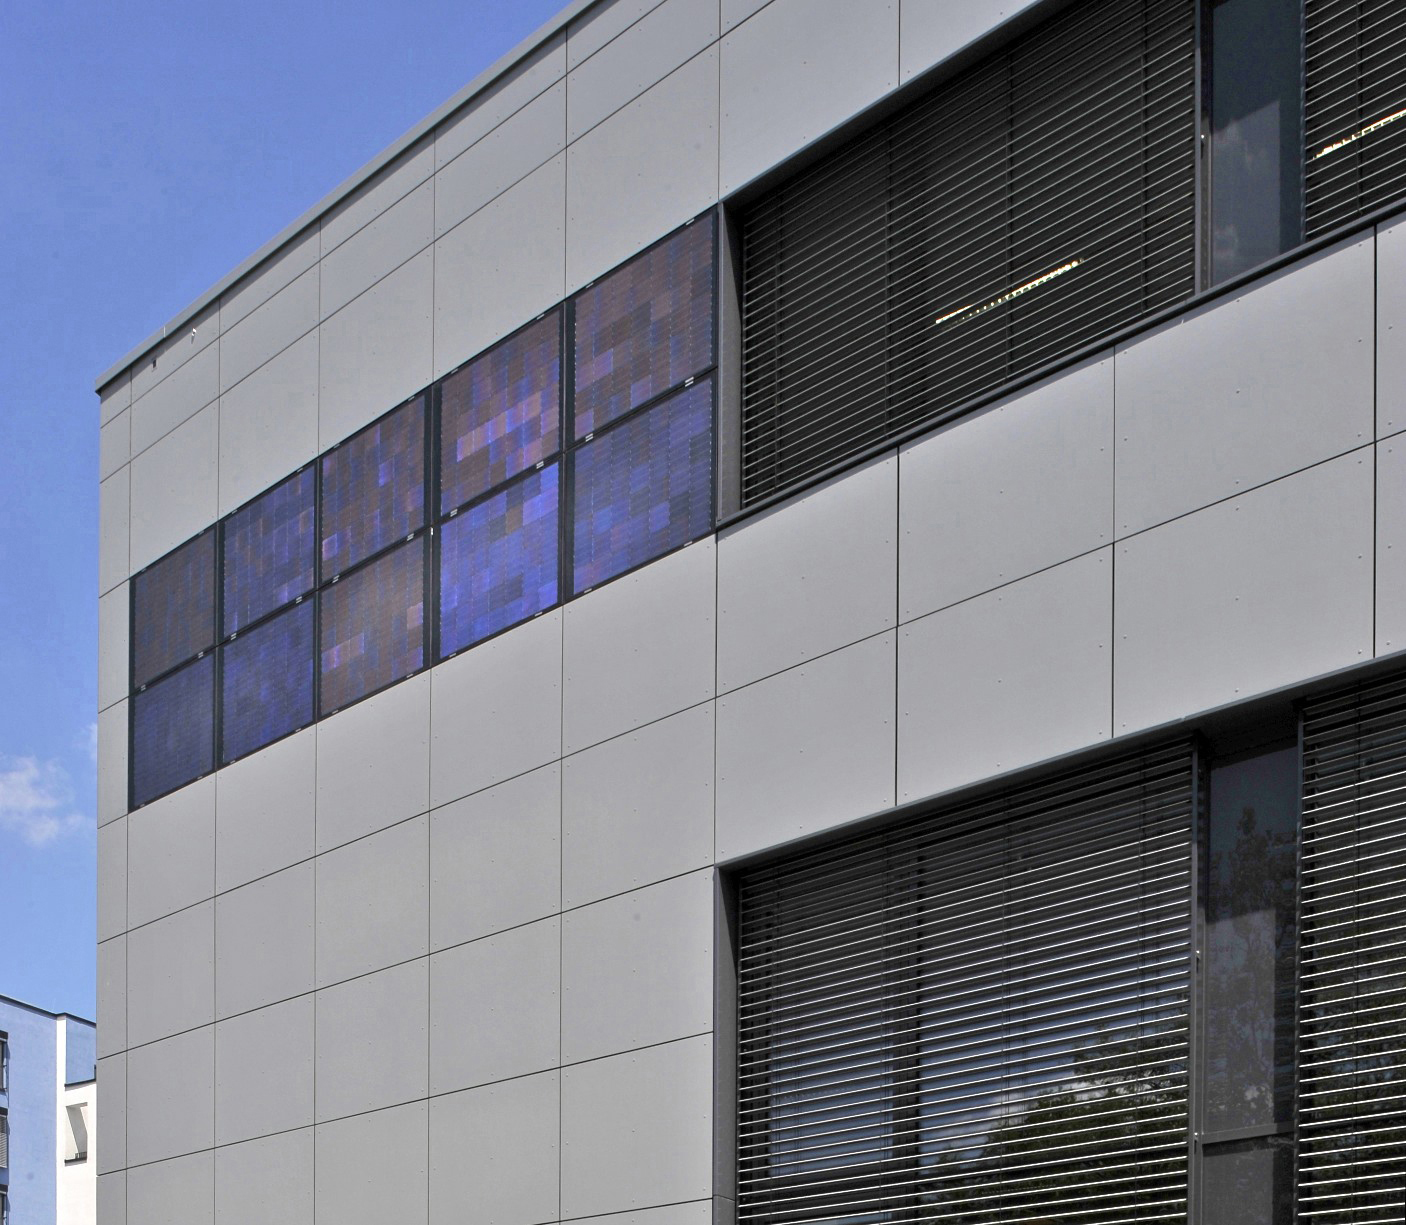 Photo: Novel crystalline PV modules are installed as cladding 